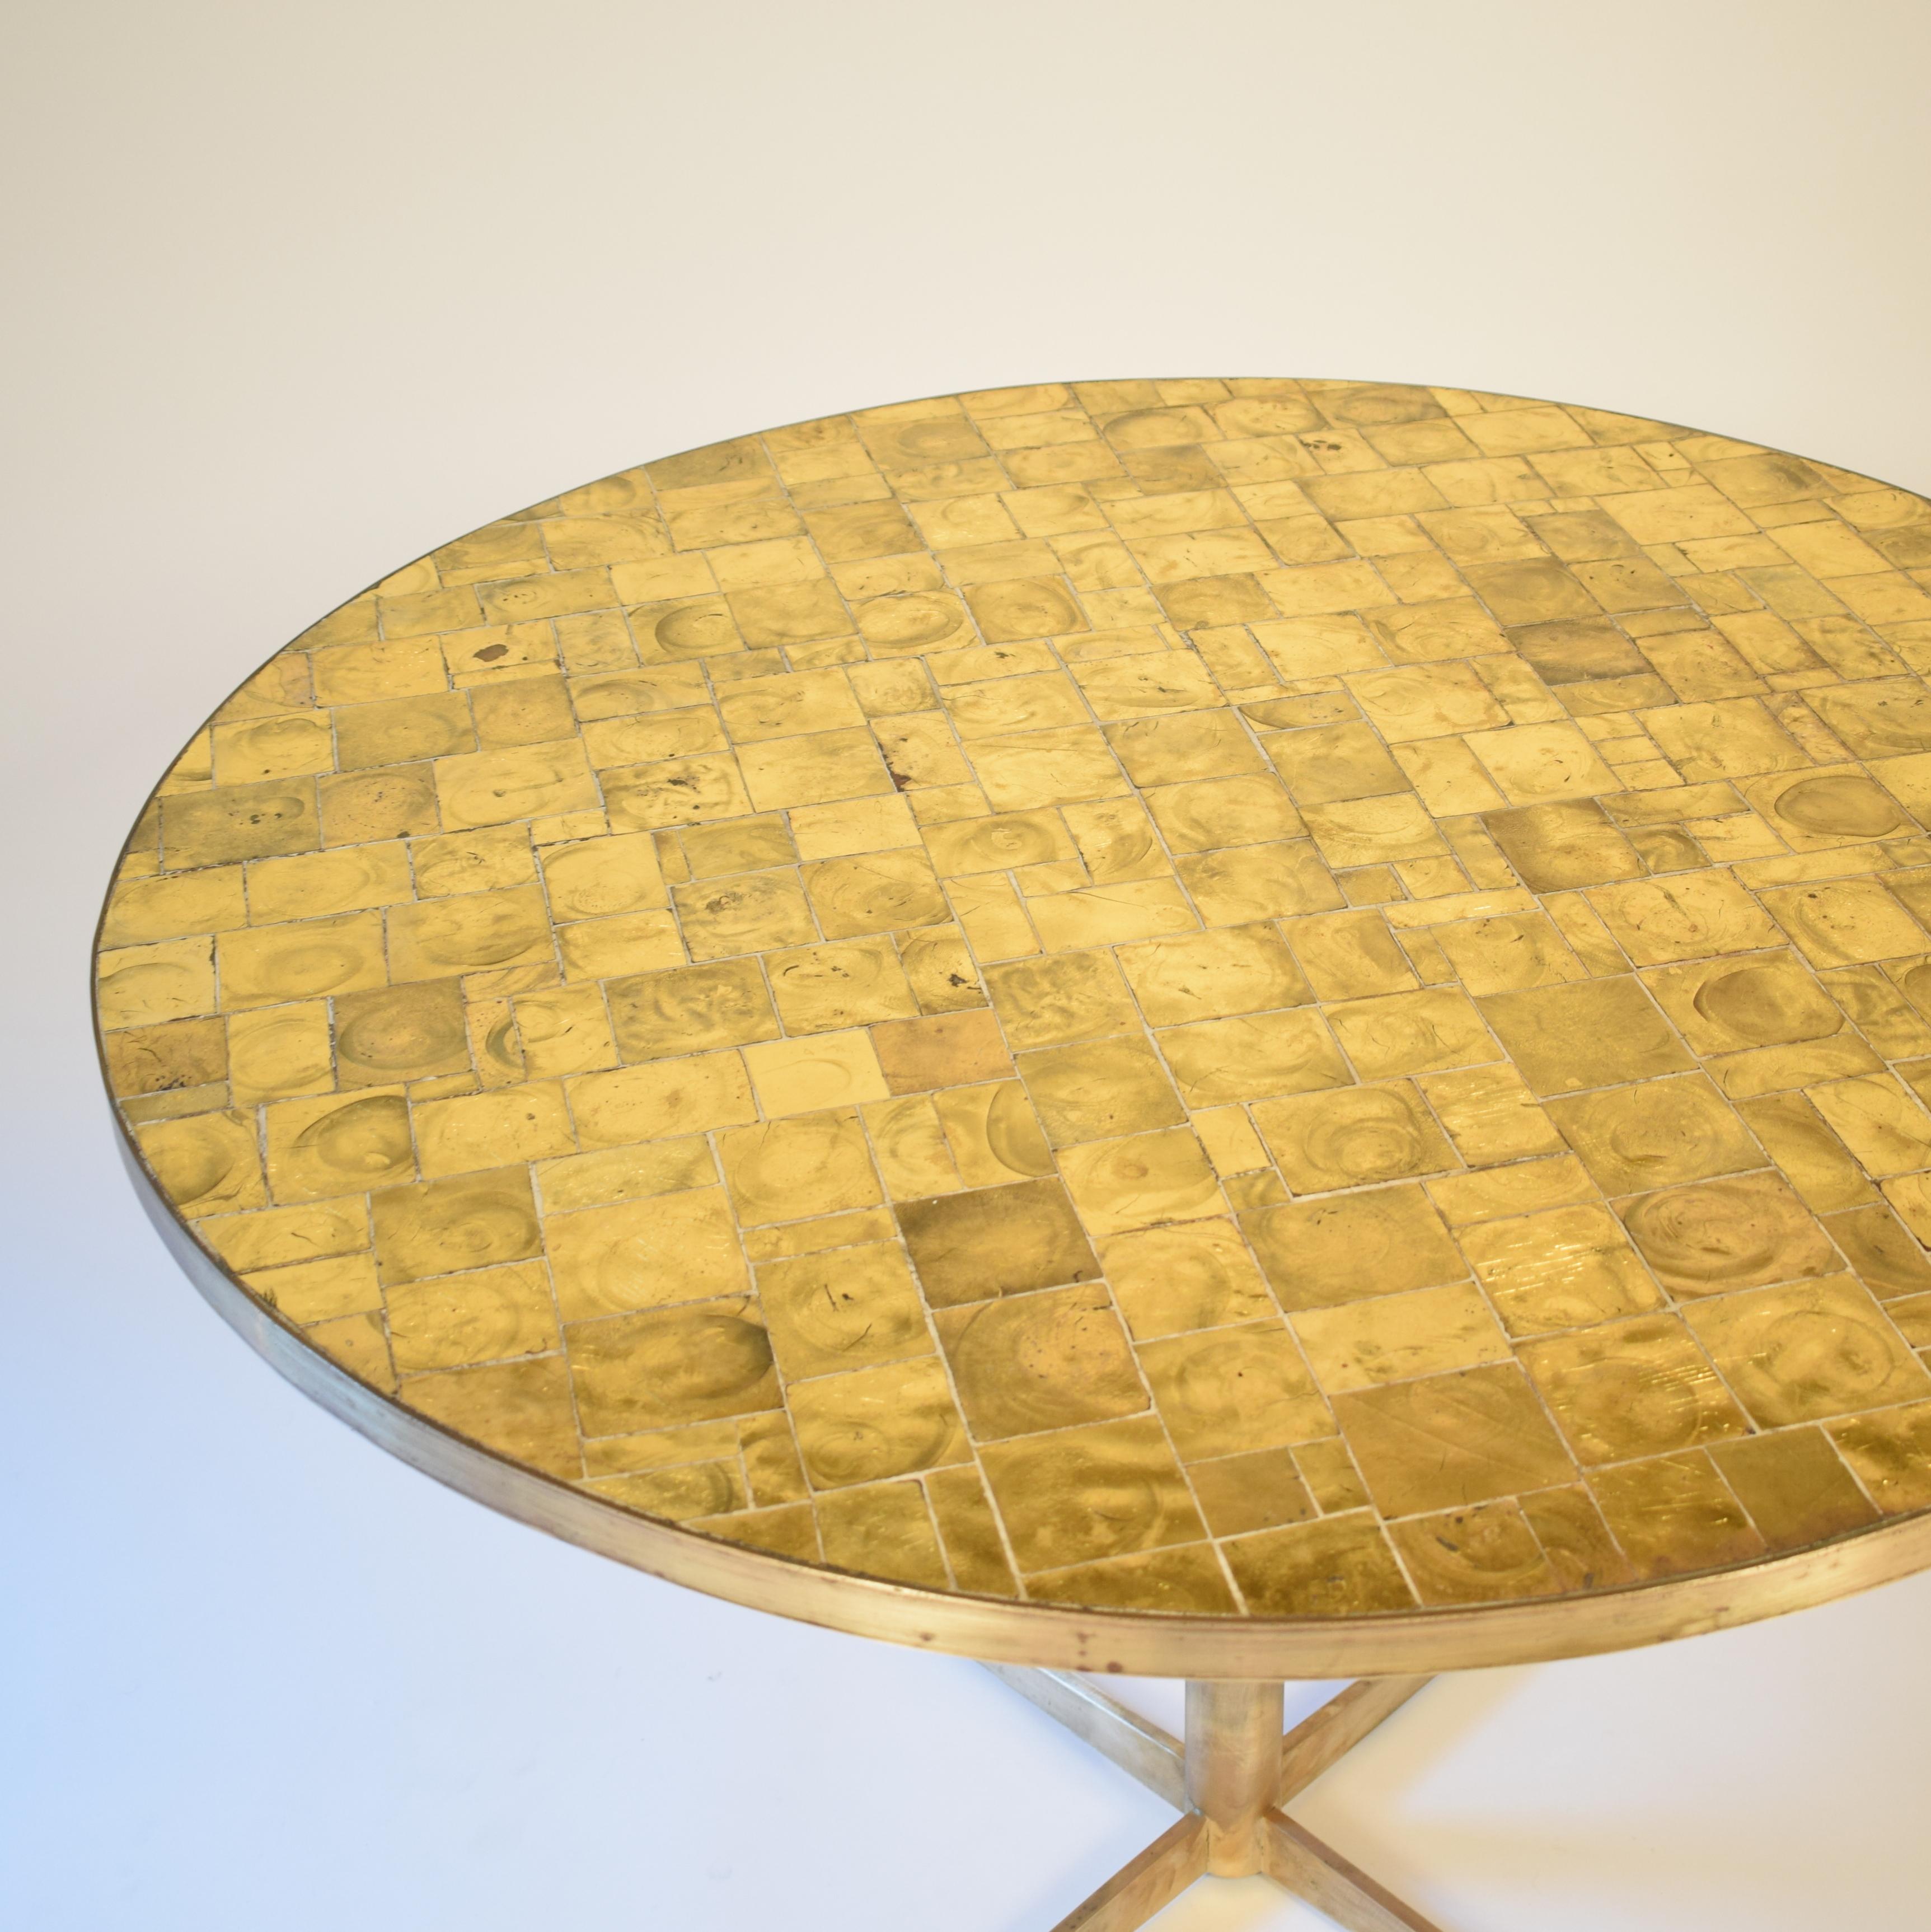 Midcentury Round Dining Table with Gilded Glass Tiles Top and Brass Base 2